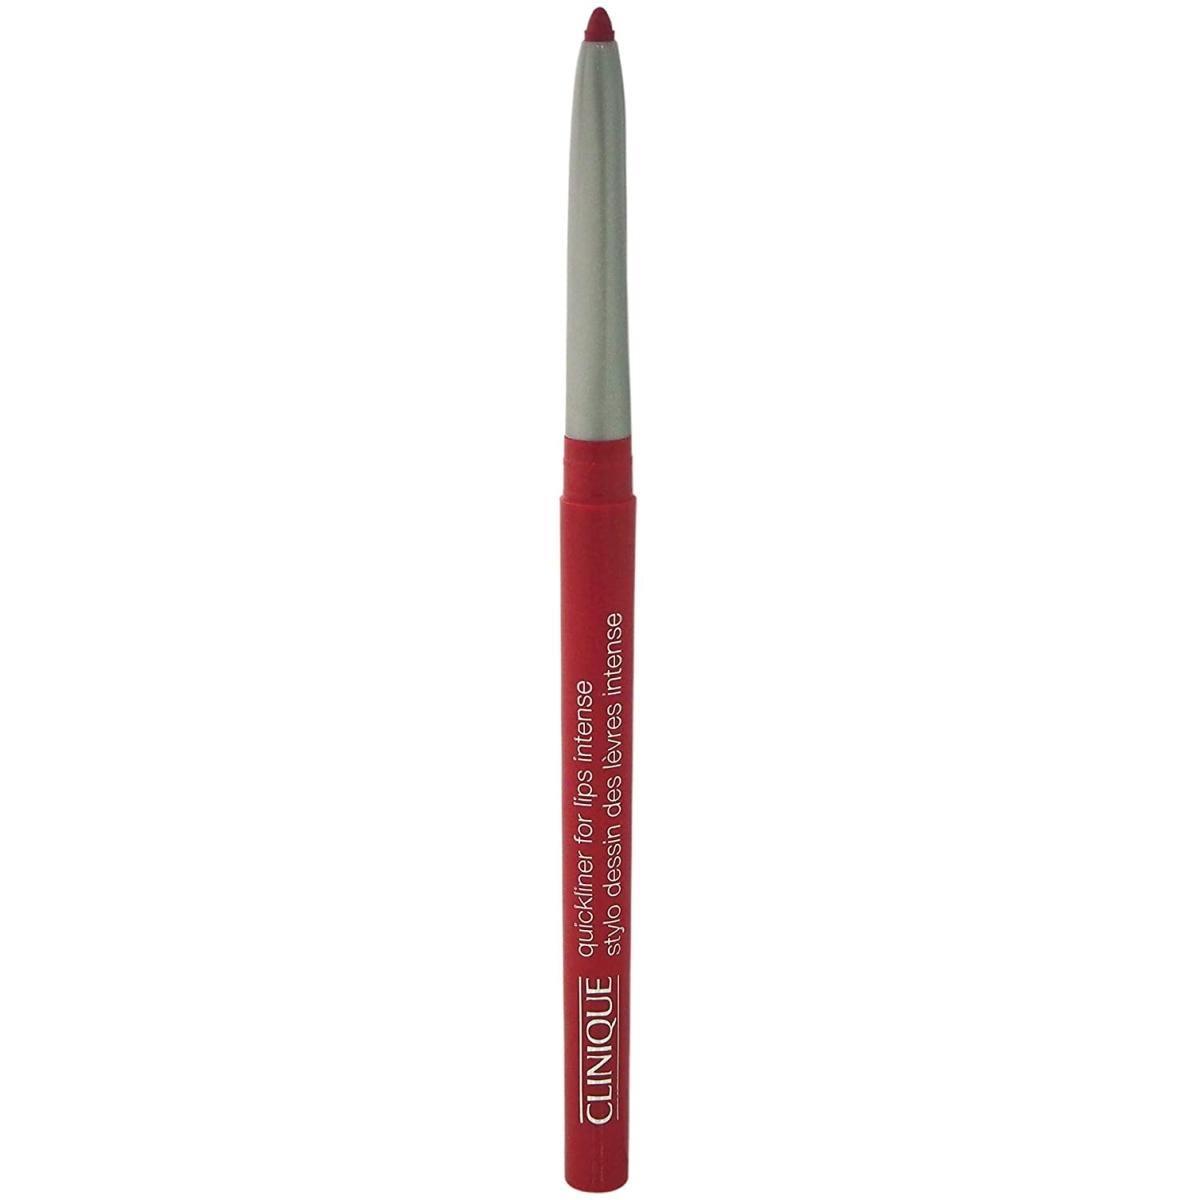 Quickliner for lips intense 05 intense passion